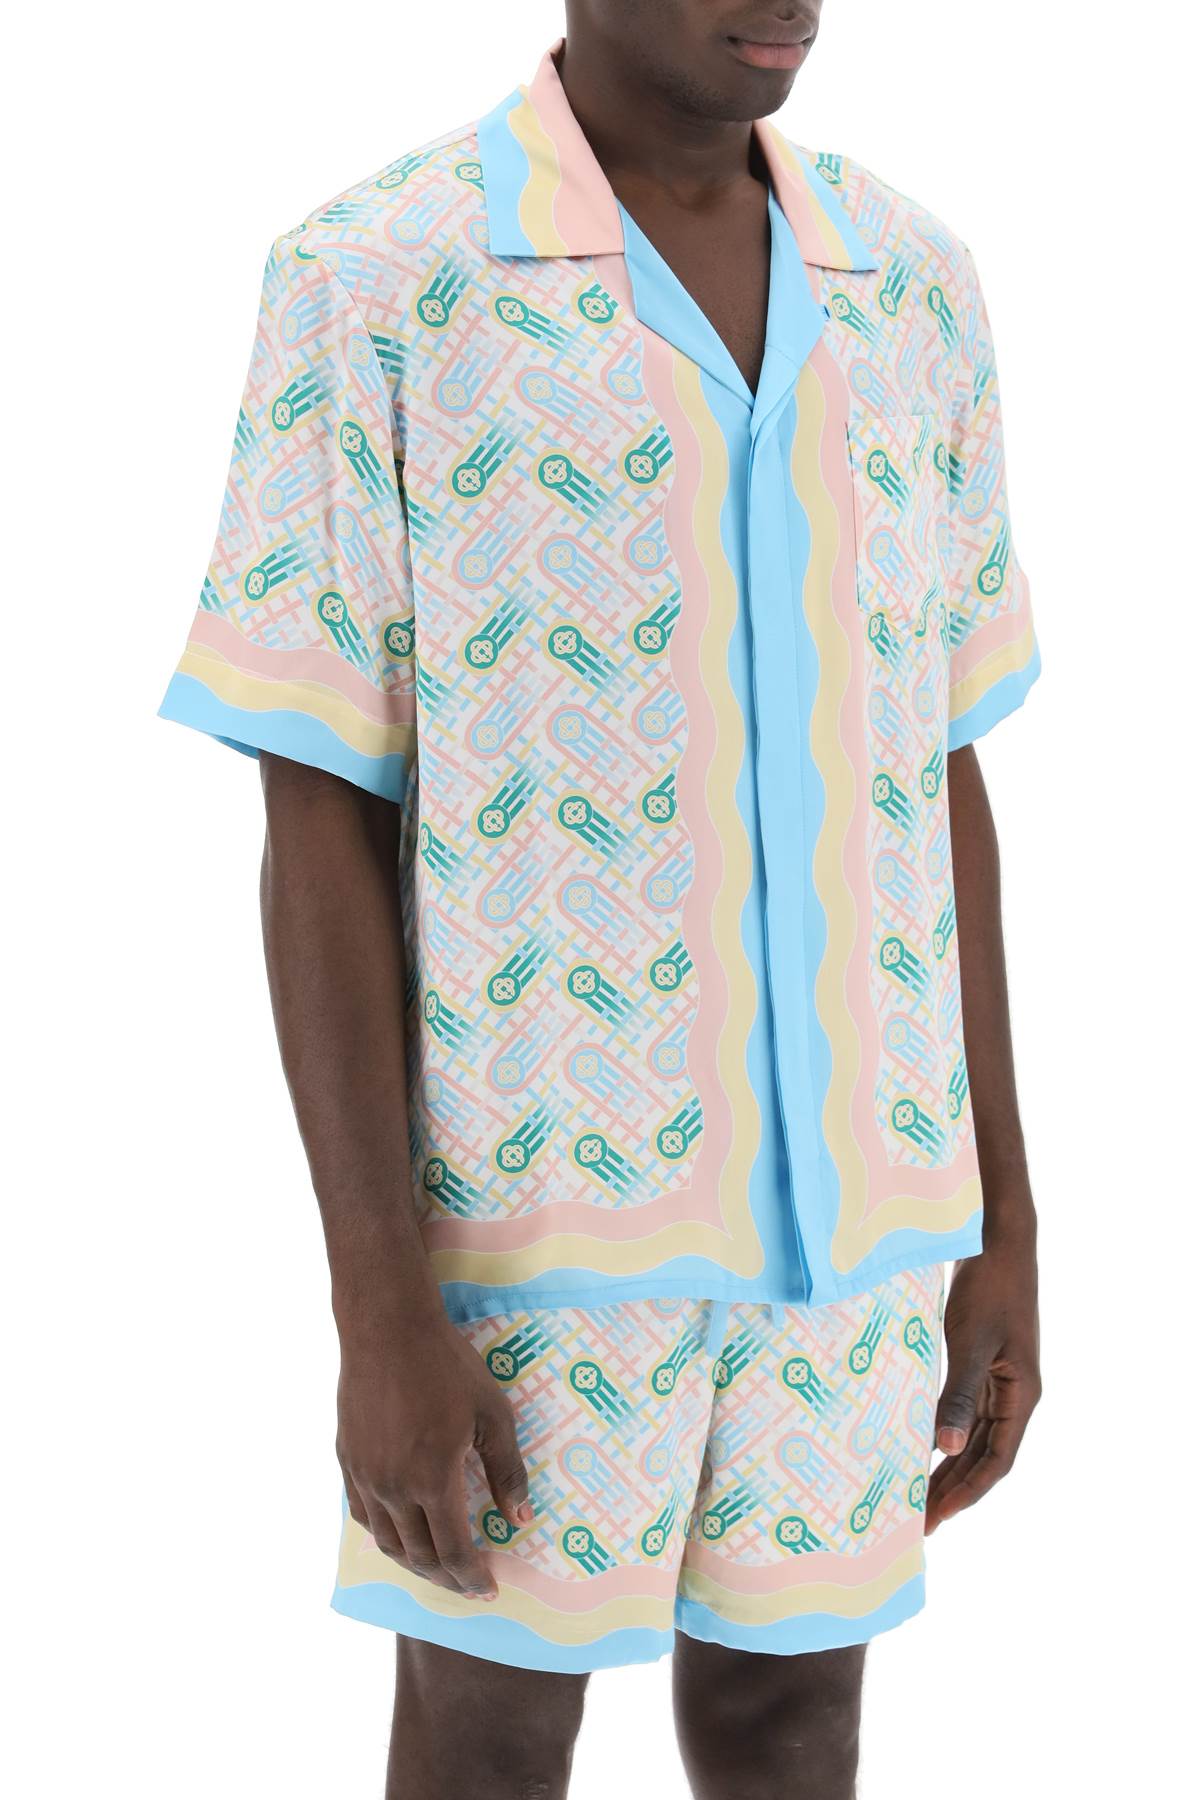 CASABLANCA Men's Multicolor Silk Bowling Shirt with Ping Pong Pattern